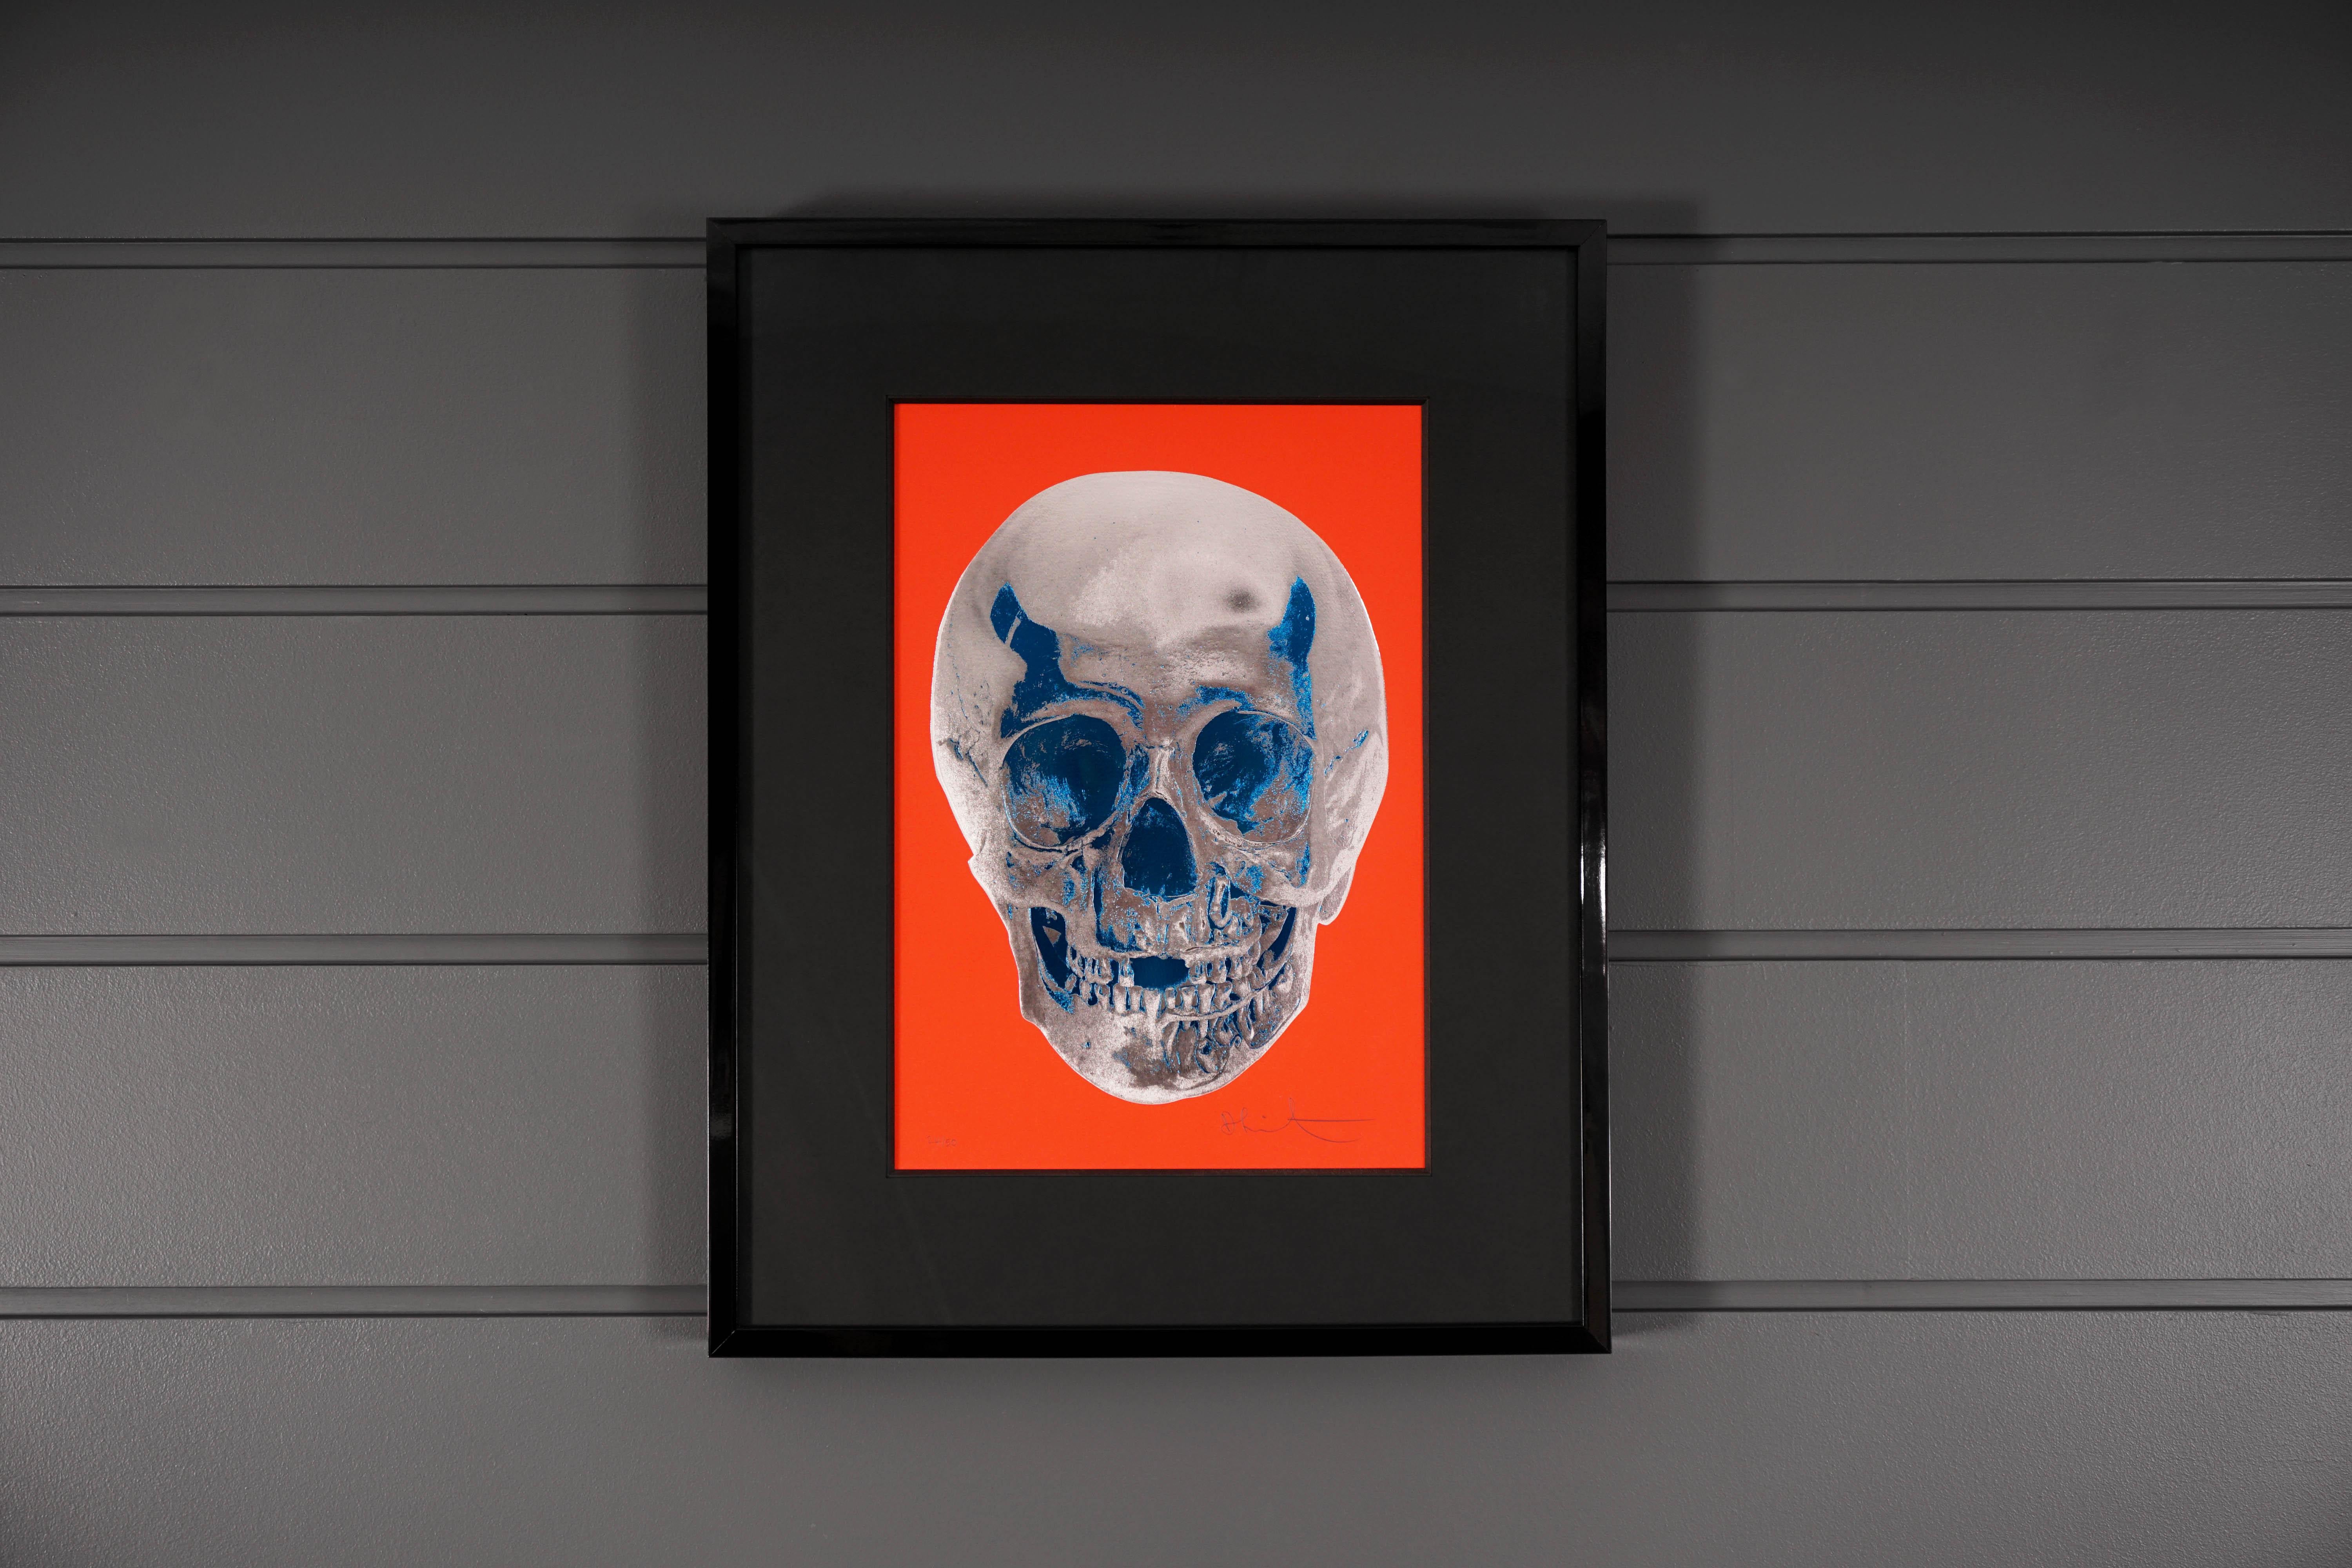 The ‘Till Death Do Us Part Skull in a warmed chili red is by master contemporary artist, Damien Hirst. This 2012 skull series is created in a small edition of only 50 pieces, each signed and numbered by the artist in pencil on the lower corners. The